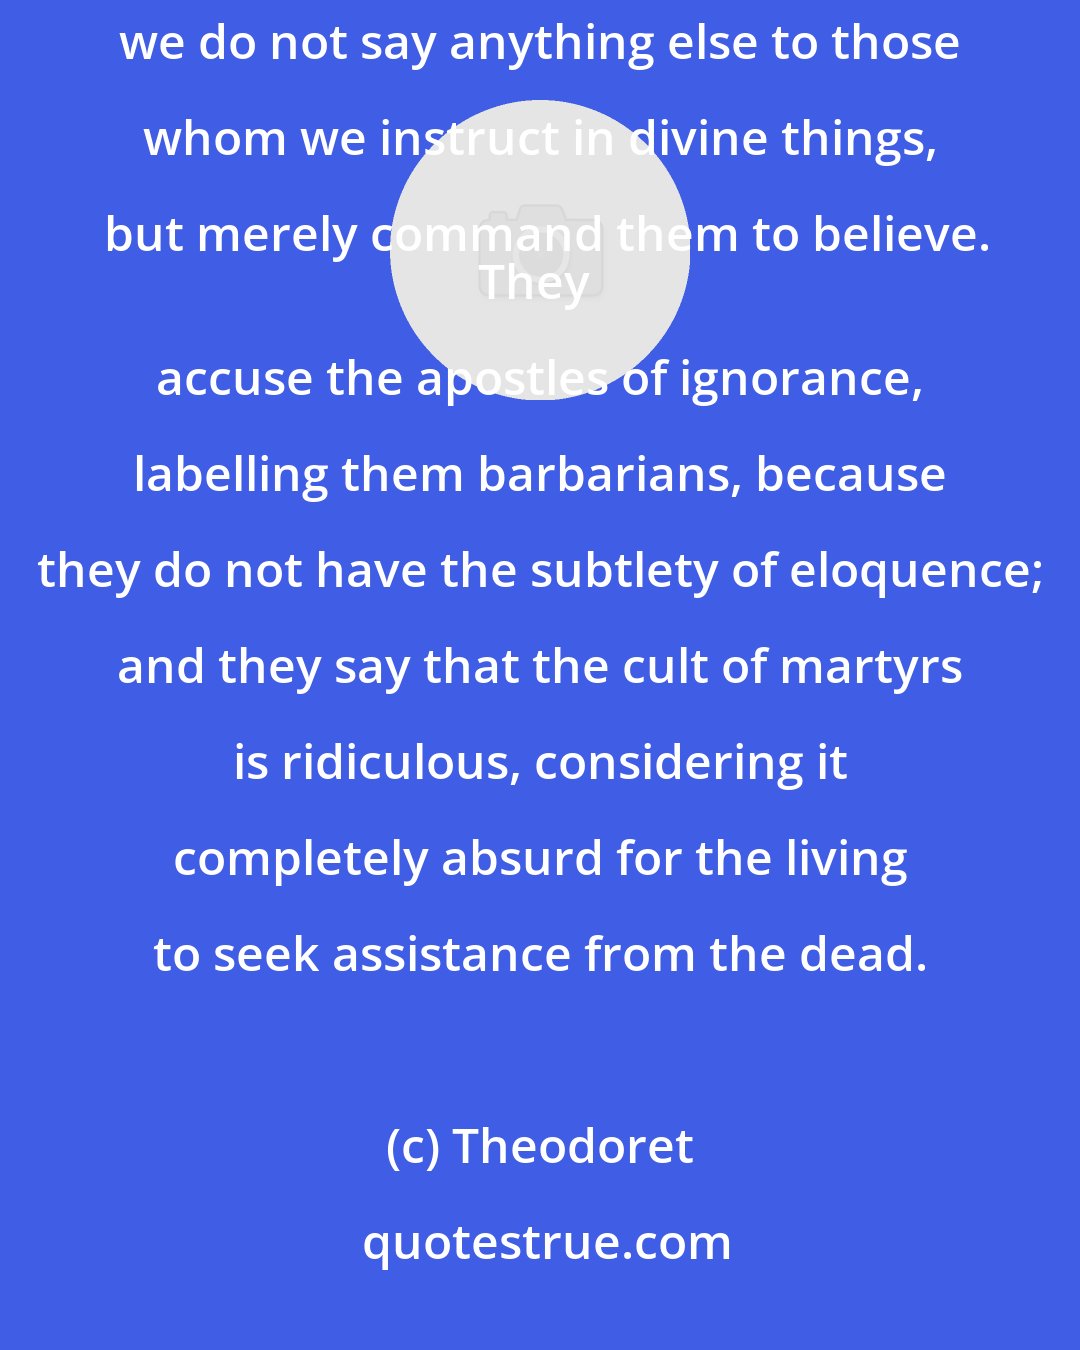 Theodoret: I have often come across convinced adepts of Greek mythology who mock our faith under the pretext that we do not say anything else to those whom we instruct in divine things, but merely command them to believe.
They accuse the apostles of ignorance, labelling them barbarians, because they do not have the subtlety of eloquence; and they say that the cult of martyrs is ridiculous, considering it completely absurd for the living to seek assistance from the dead.